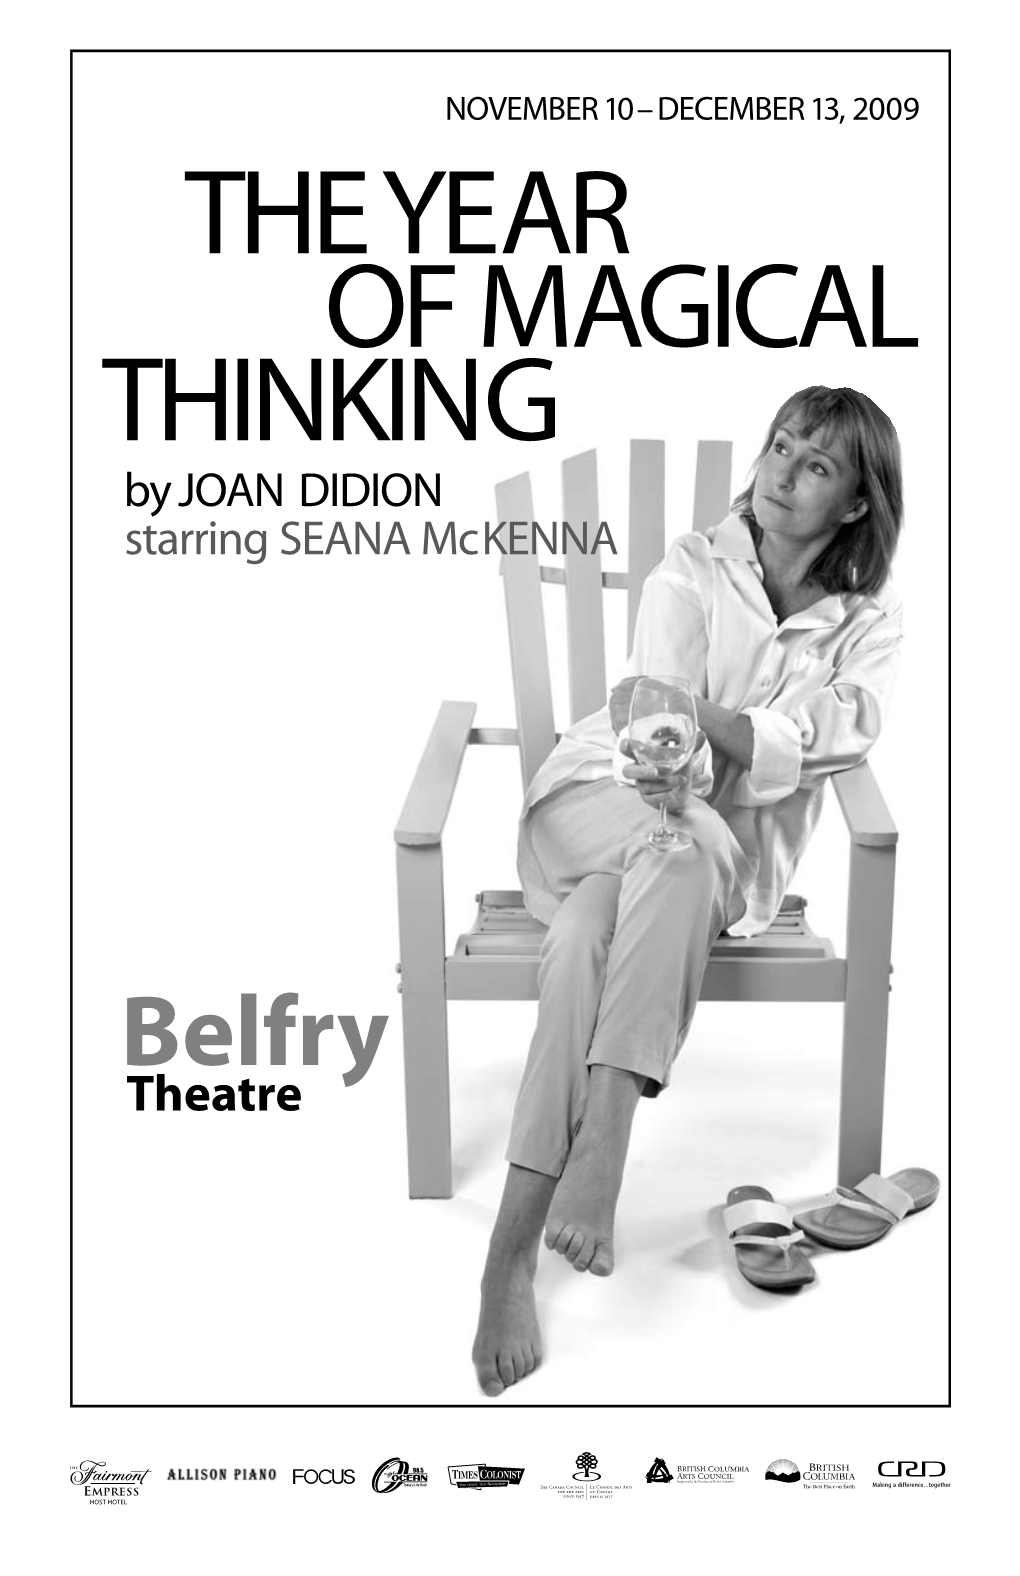 THE YEAR of MAGICAL THINKING by JOAN DIDION Starring SEANA Mckenna